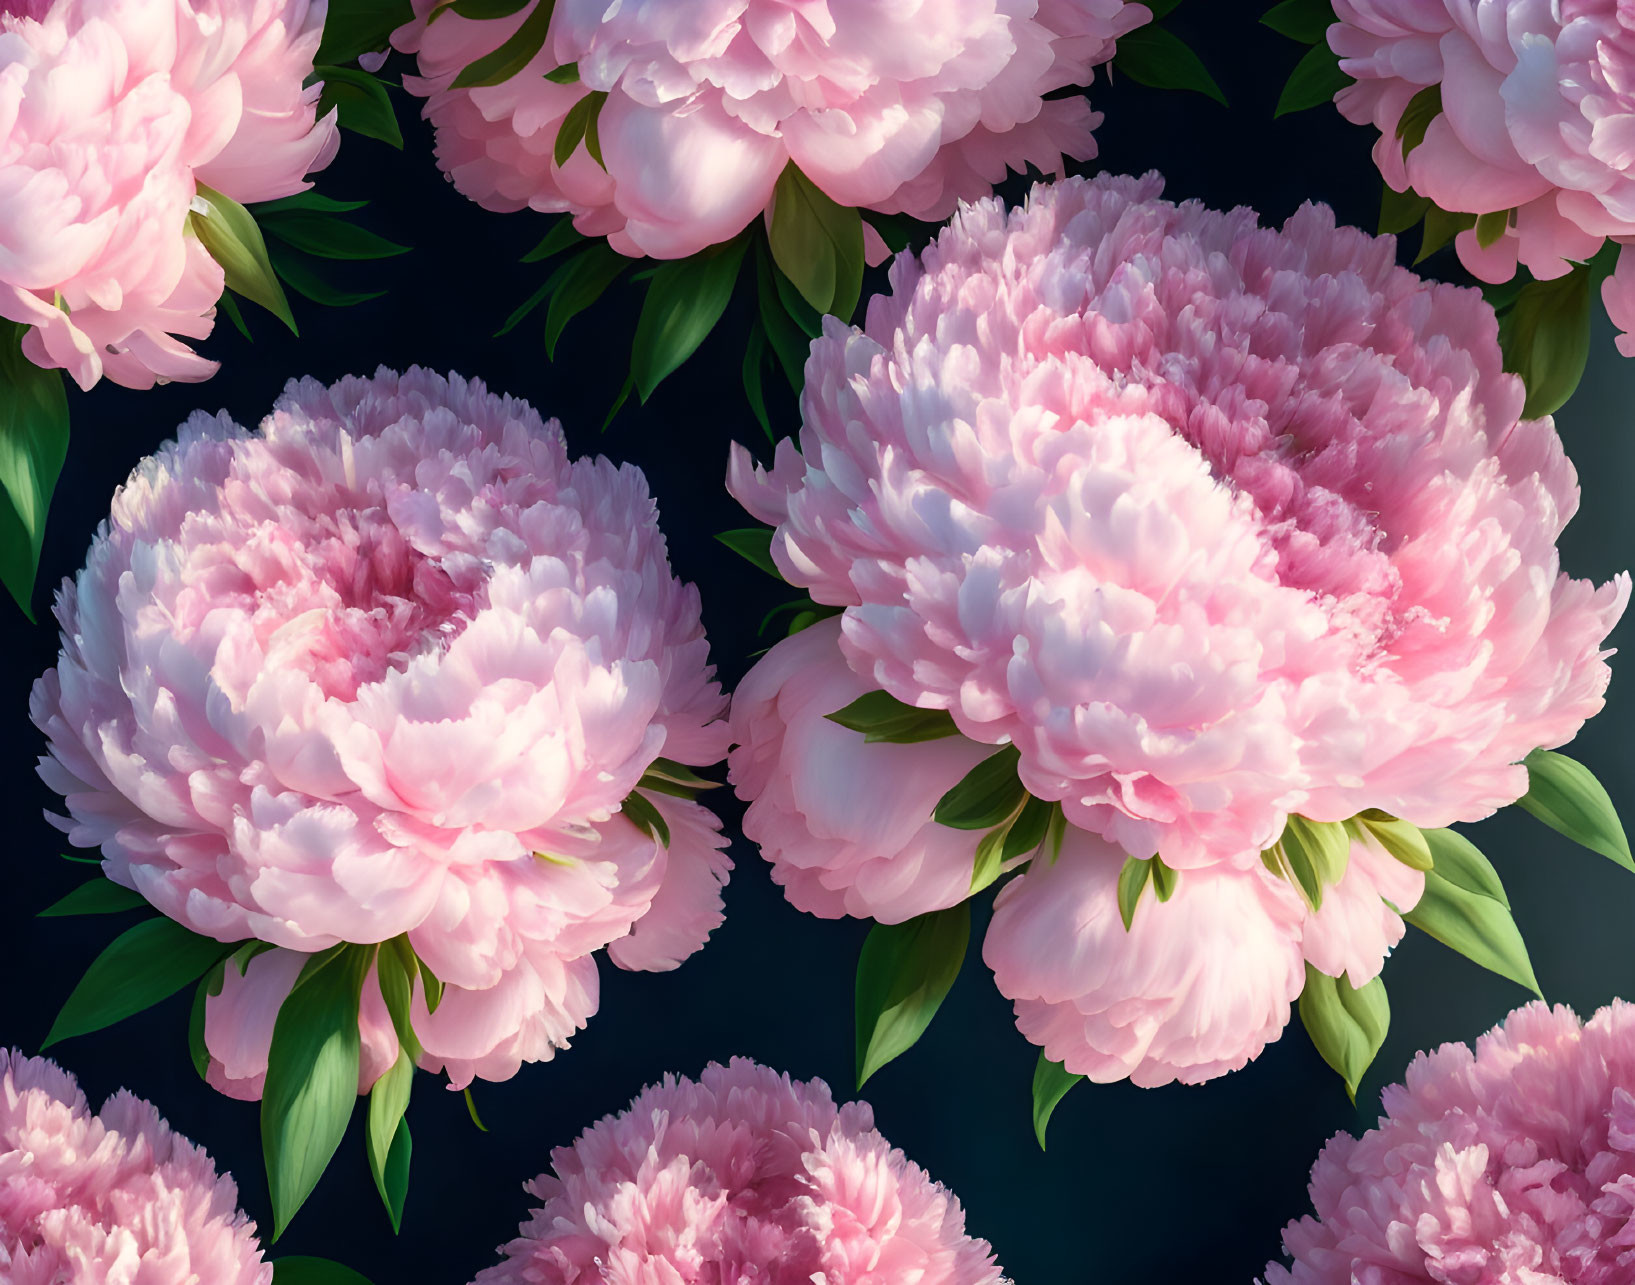 Vibrant pink peonies on dark background: detailed and romantic floral pattern